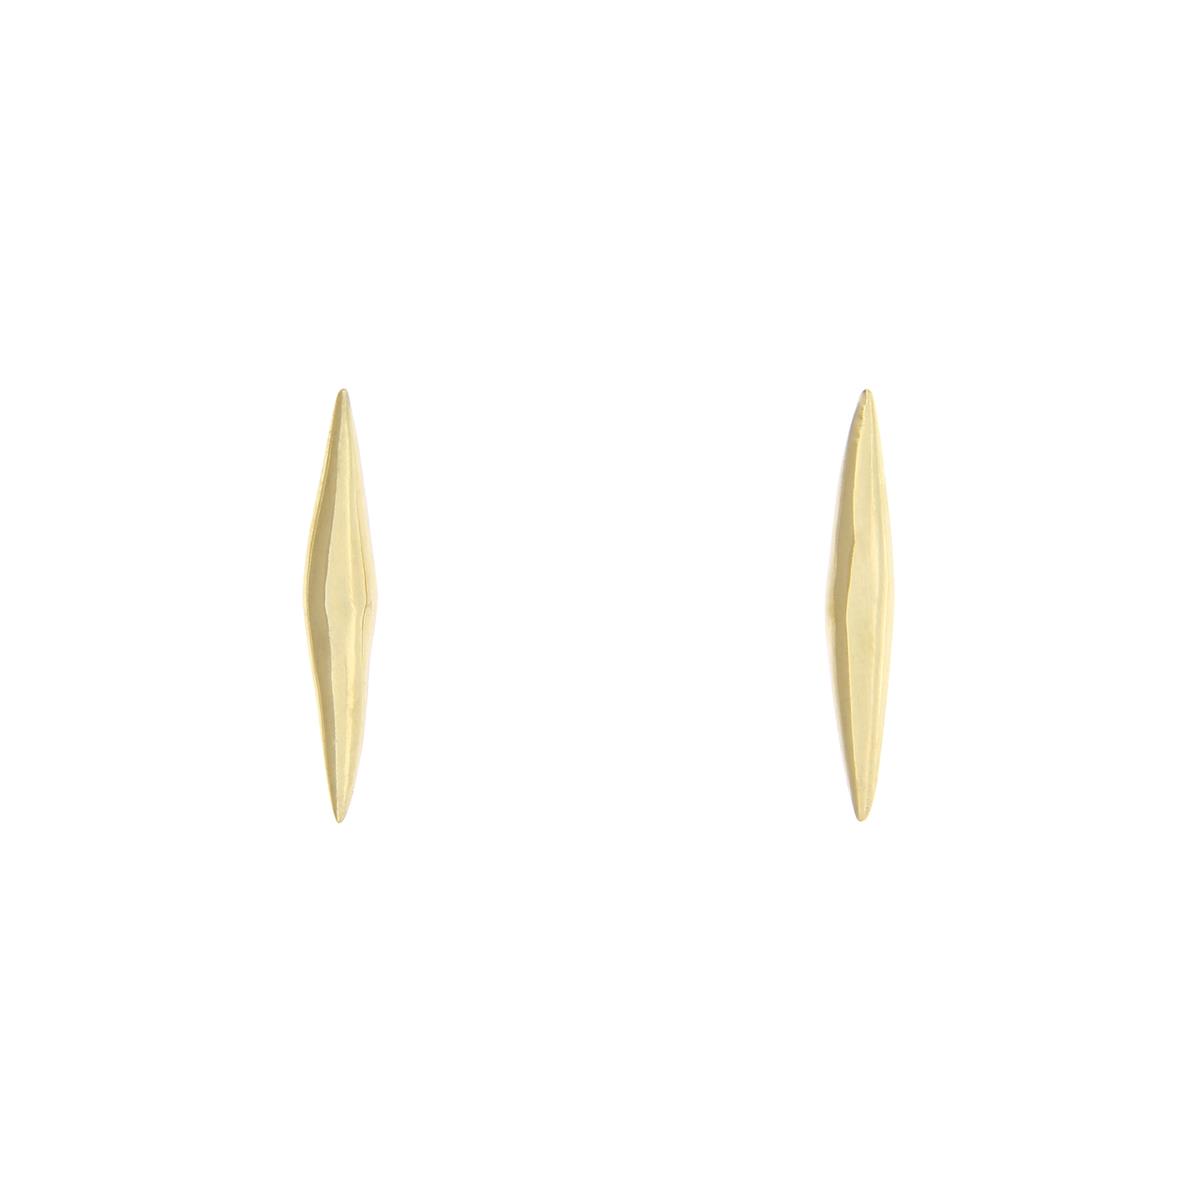 Katie g. Jewellery - Shooting Star S - Champagnergold Polished